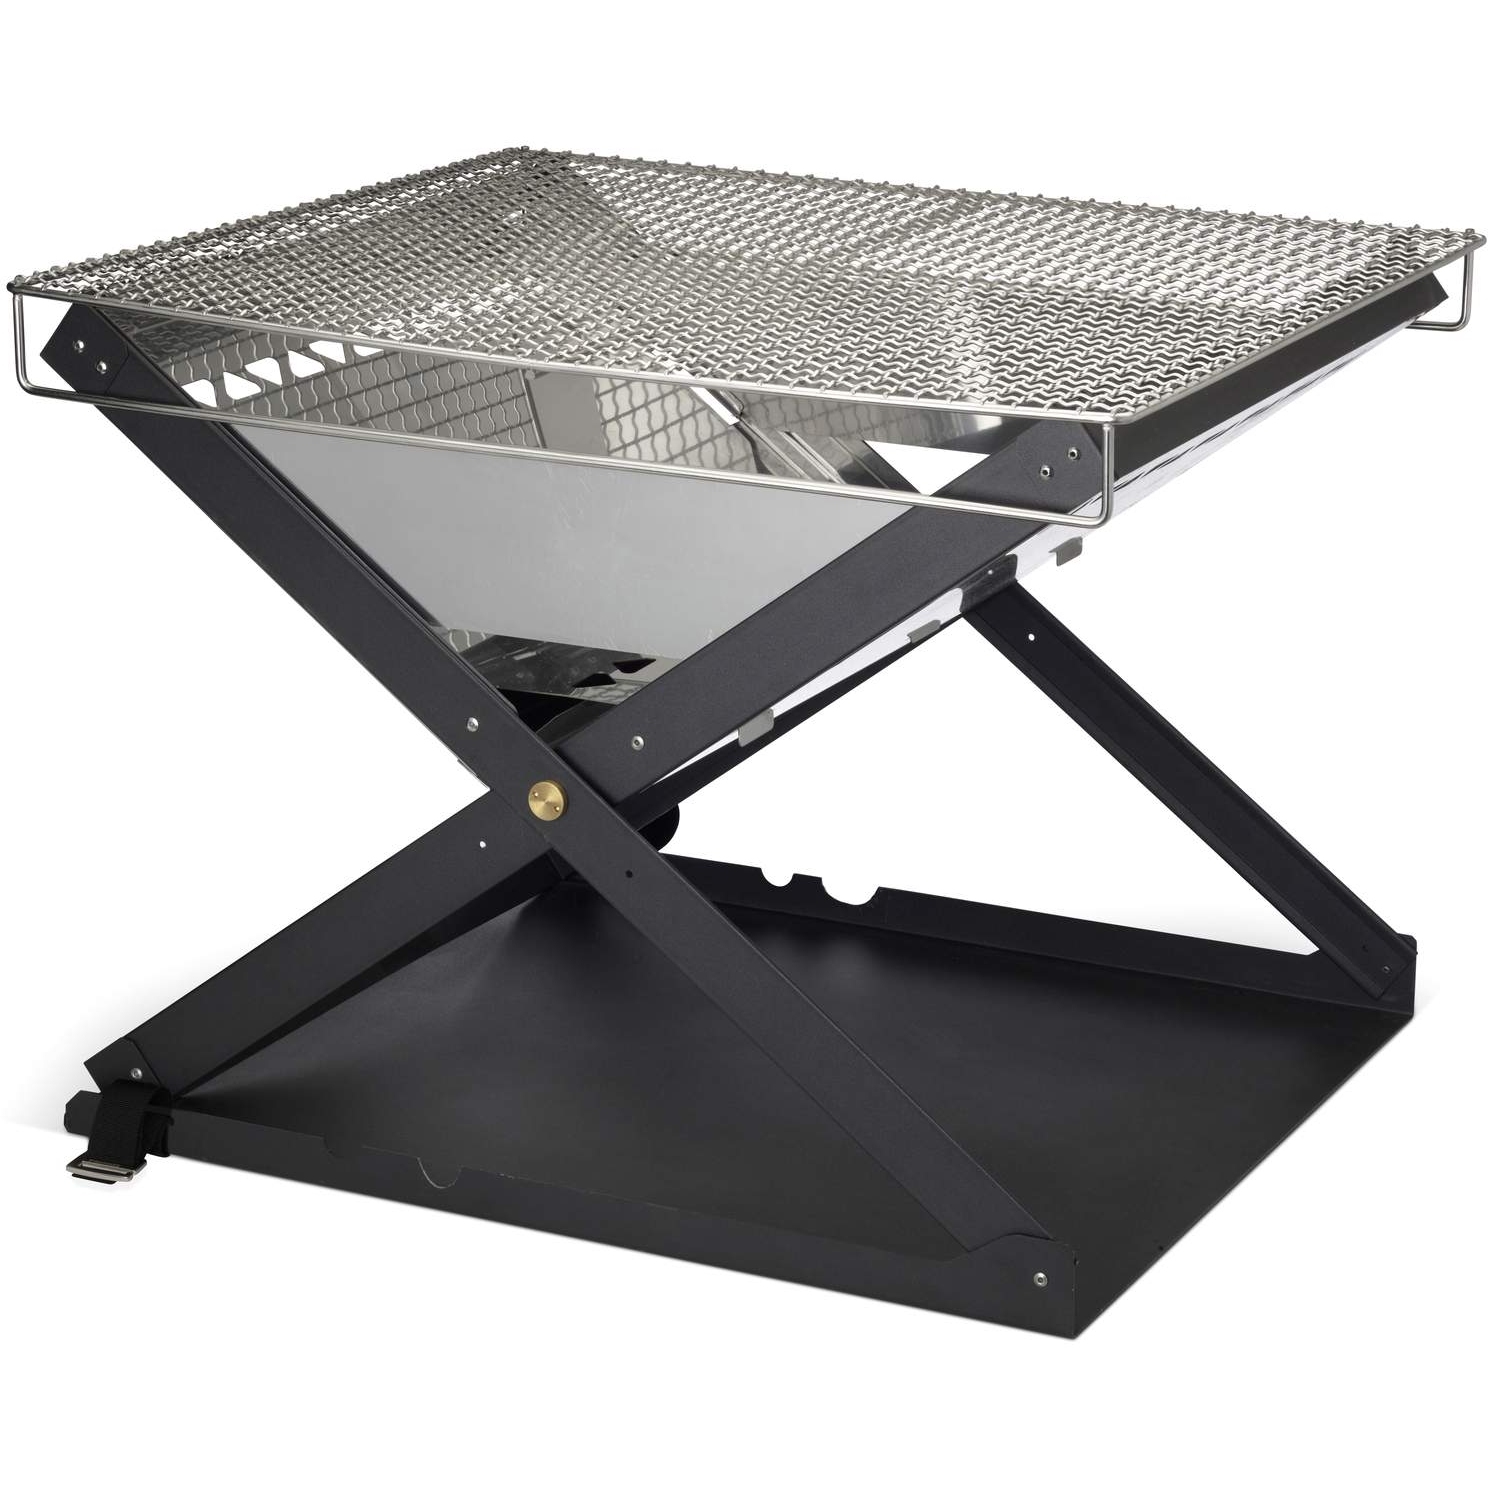 Productfoto van Primus Kamoto OpenFire Pit Large - Barbecue